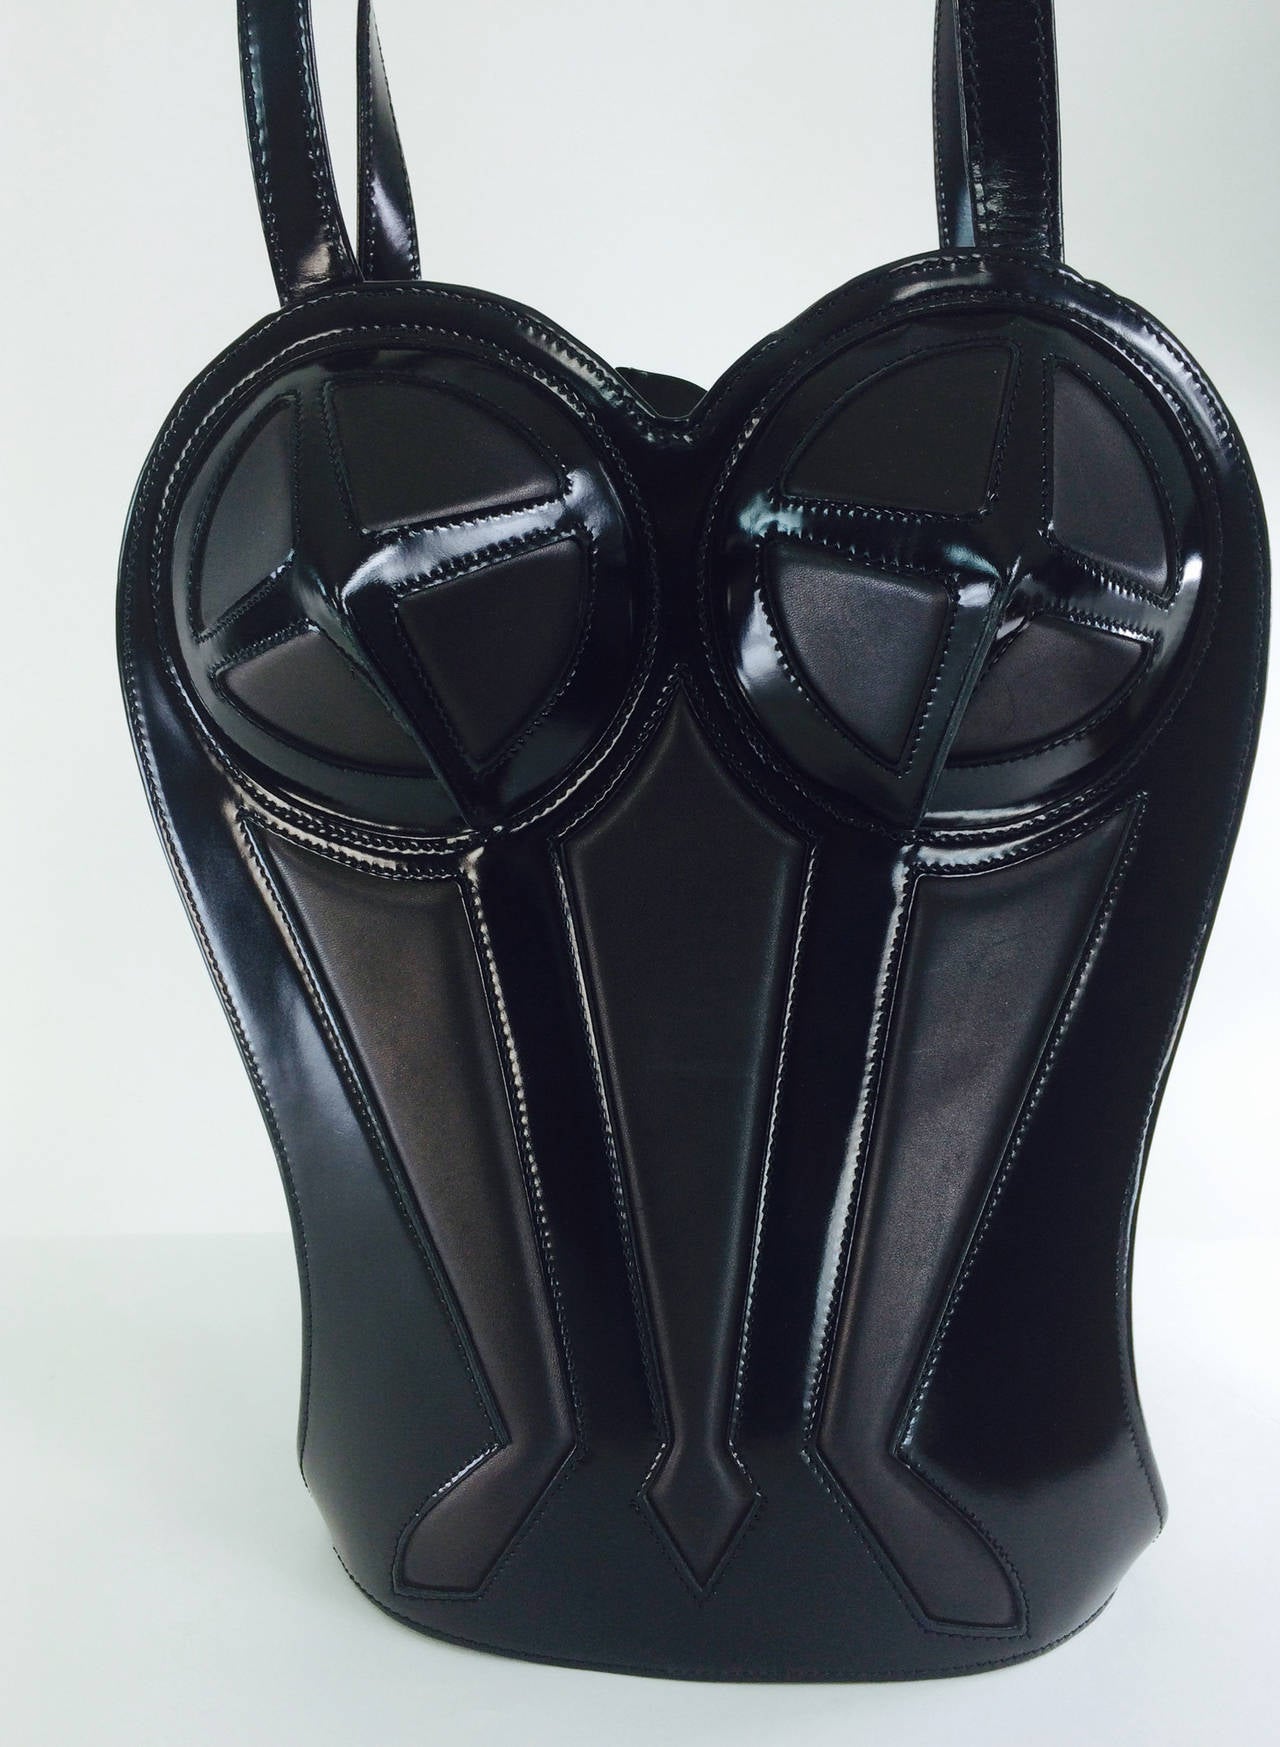 Jean Paul Gaultier 1998 structured black glazed leather and matte leather shoulder bag...Rare to find...Lined in black watered taffeta, there is a single zipper compartment...The bag zipps from the center down to the base of the bag allowing